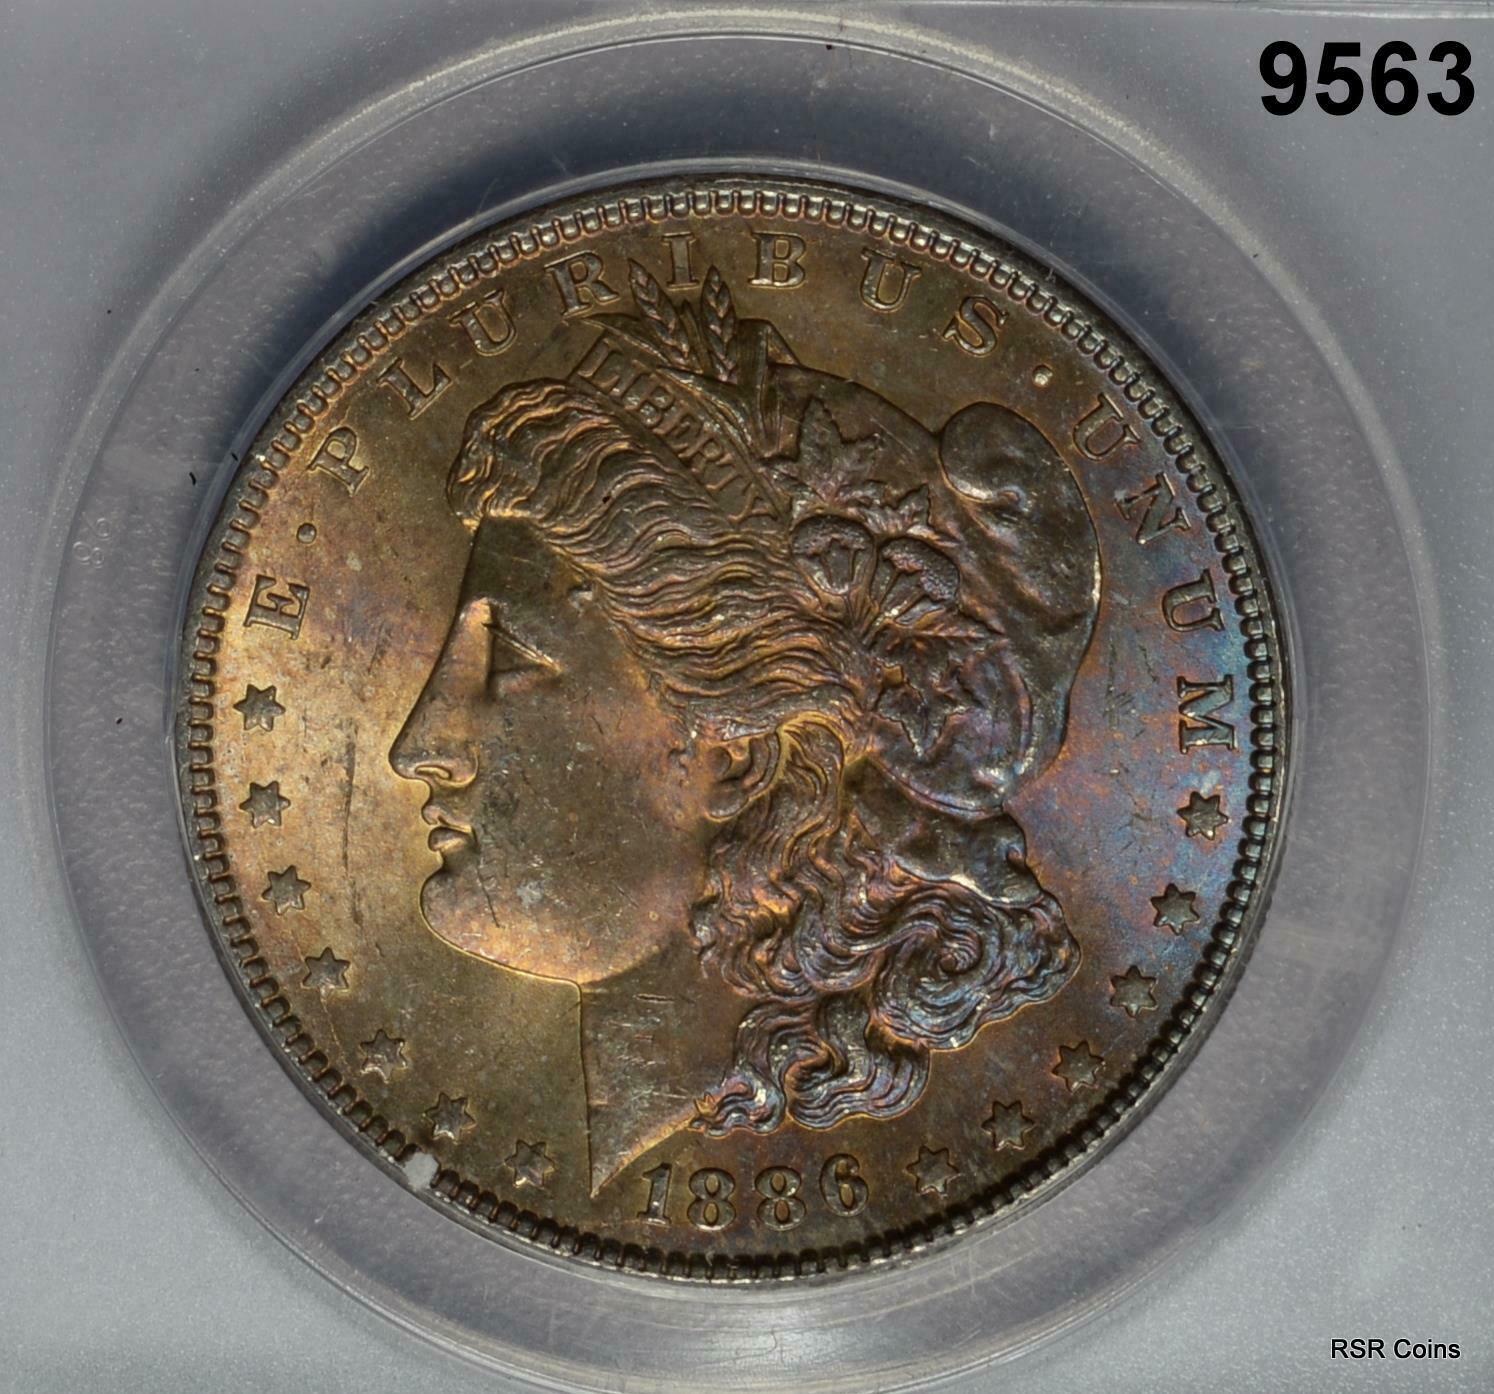 1886 P MORGAN SILVER DOLLAR ANACS CERTIFIED MS64 AMBER- BLUE TONED OBVERSE #9563